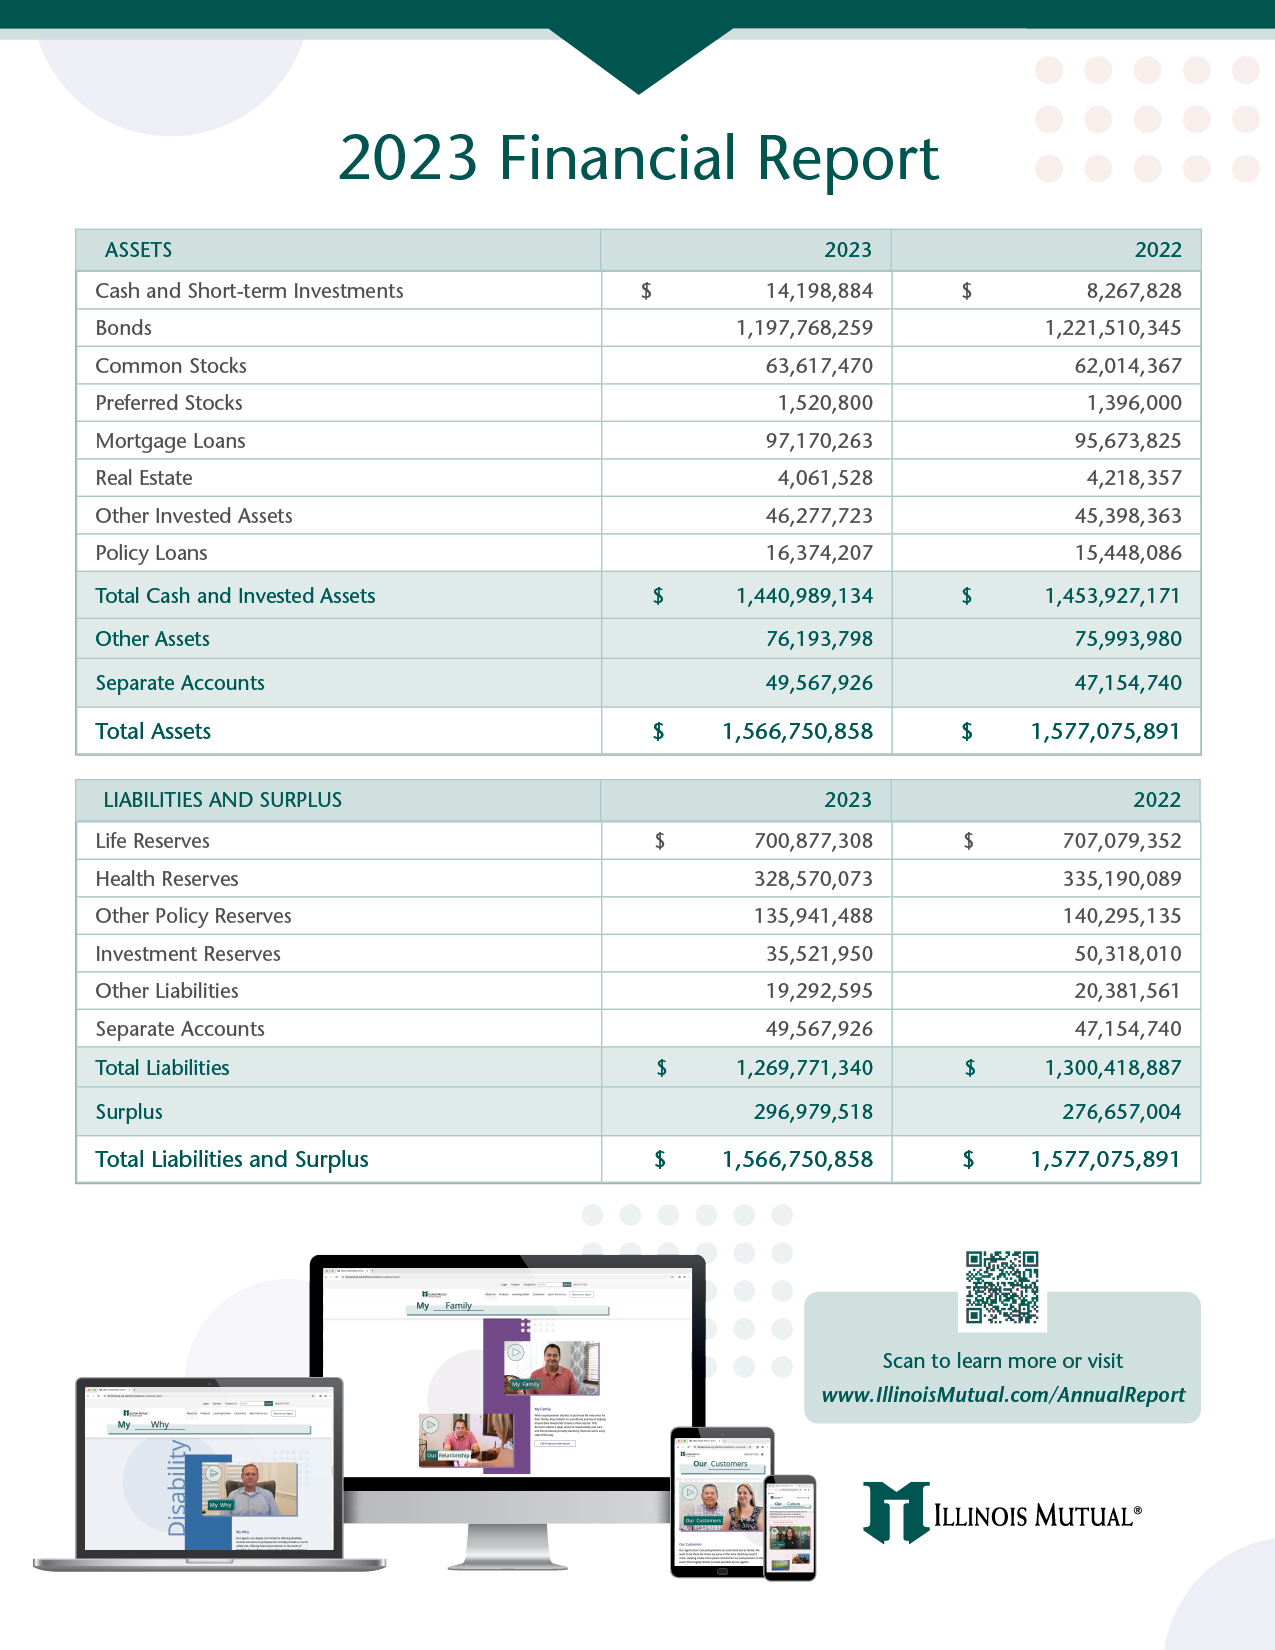 Image of the financial report PDF